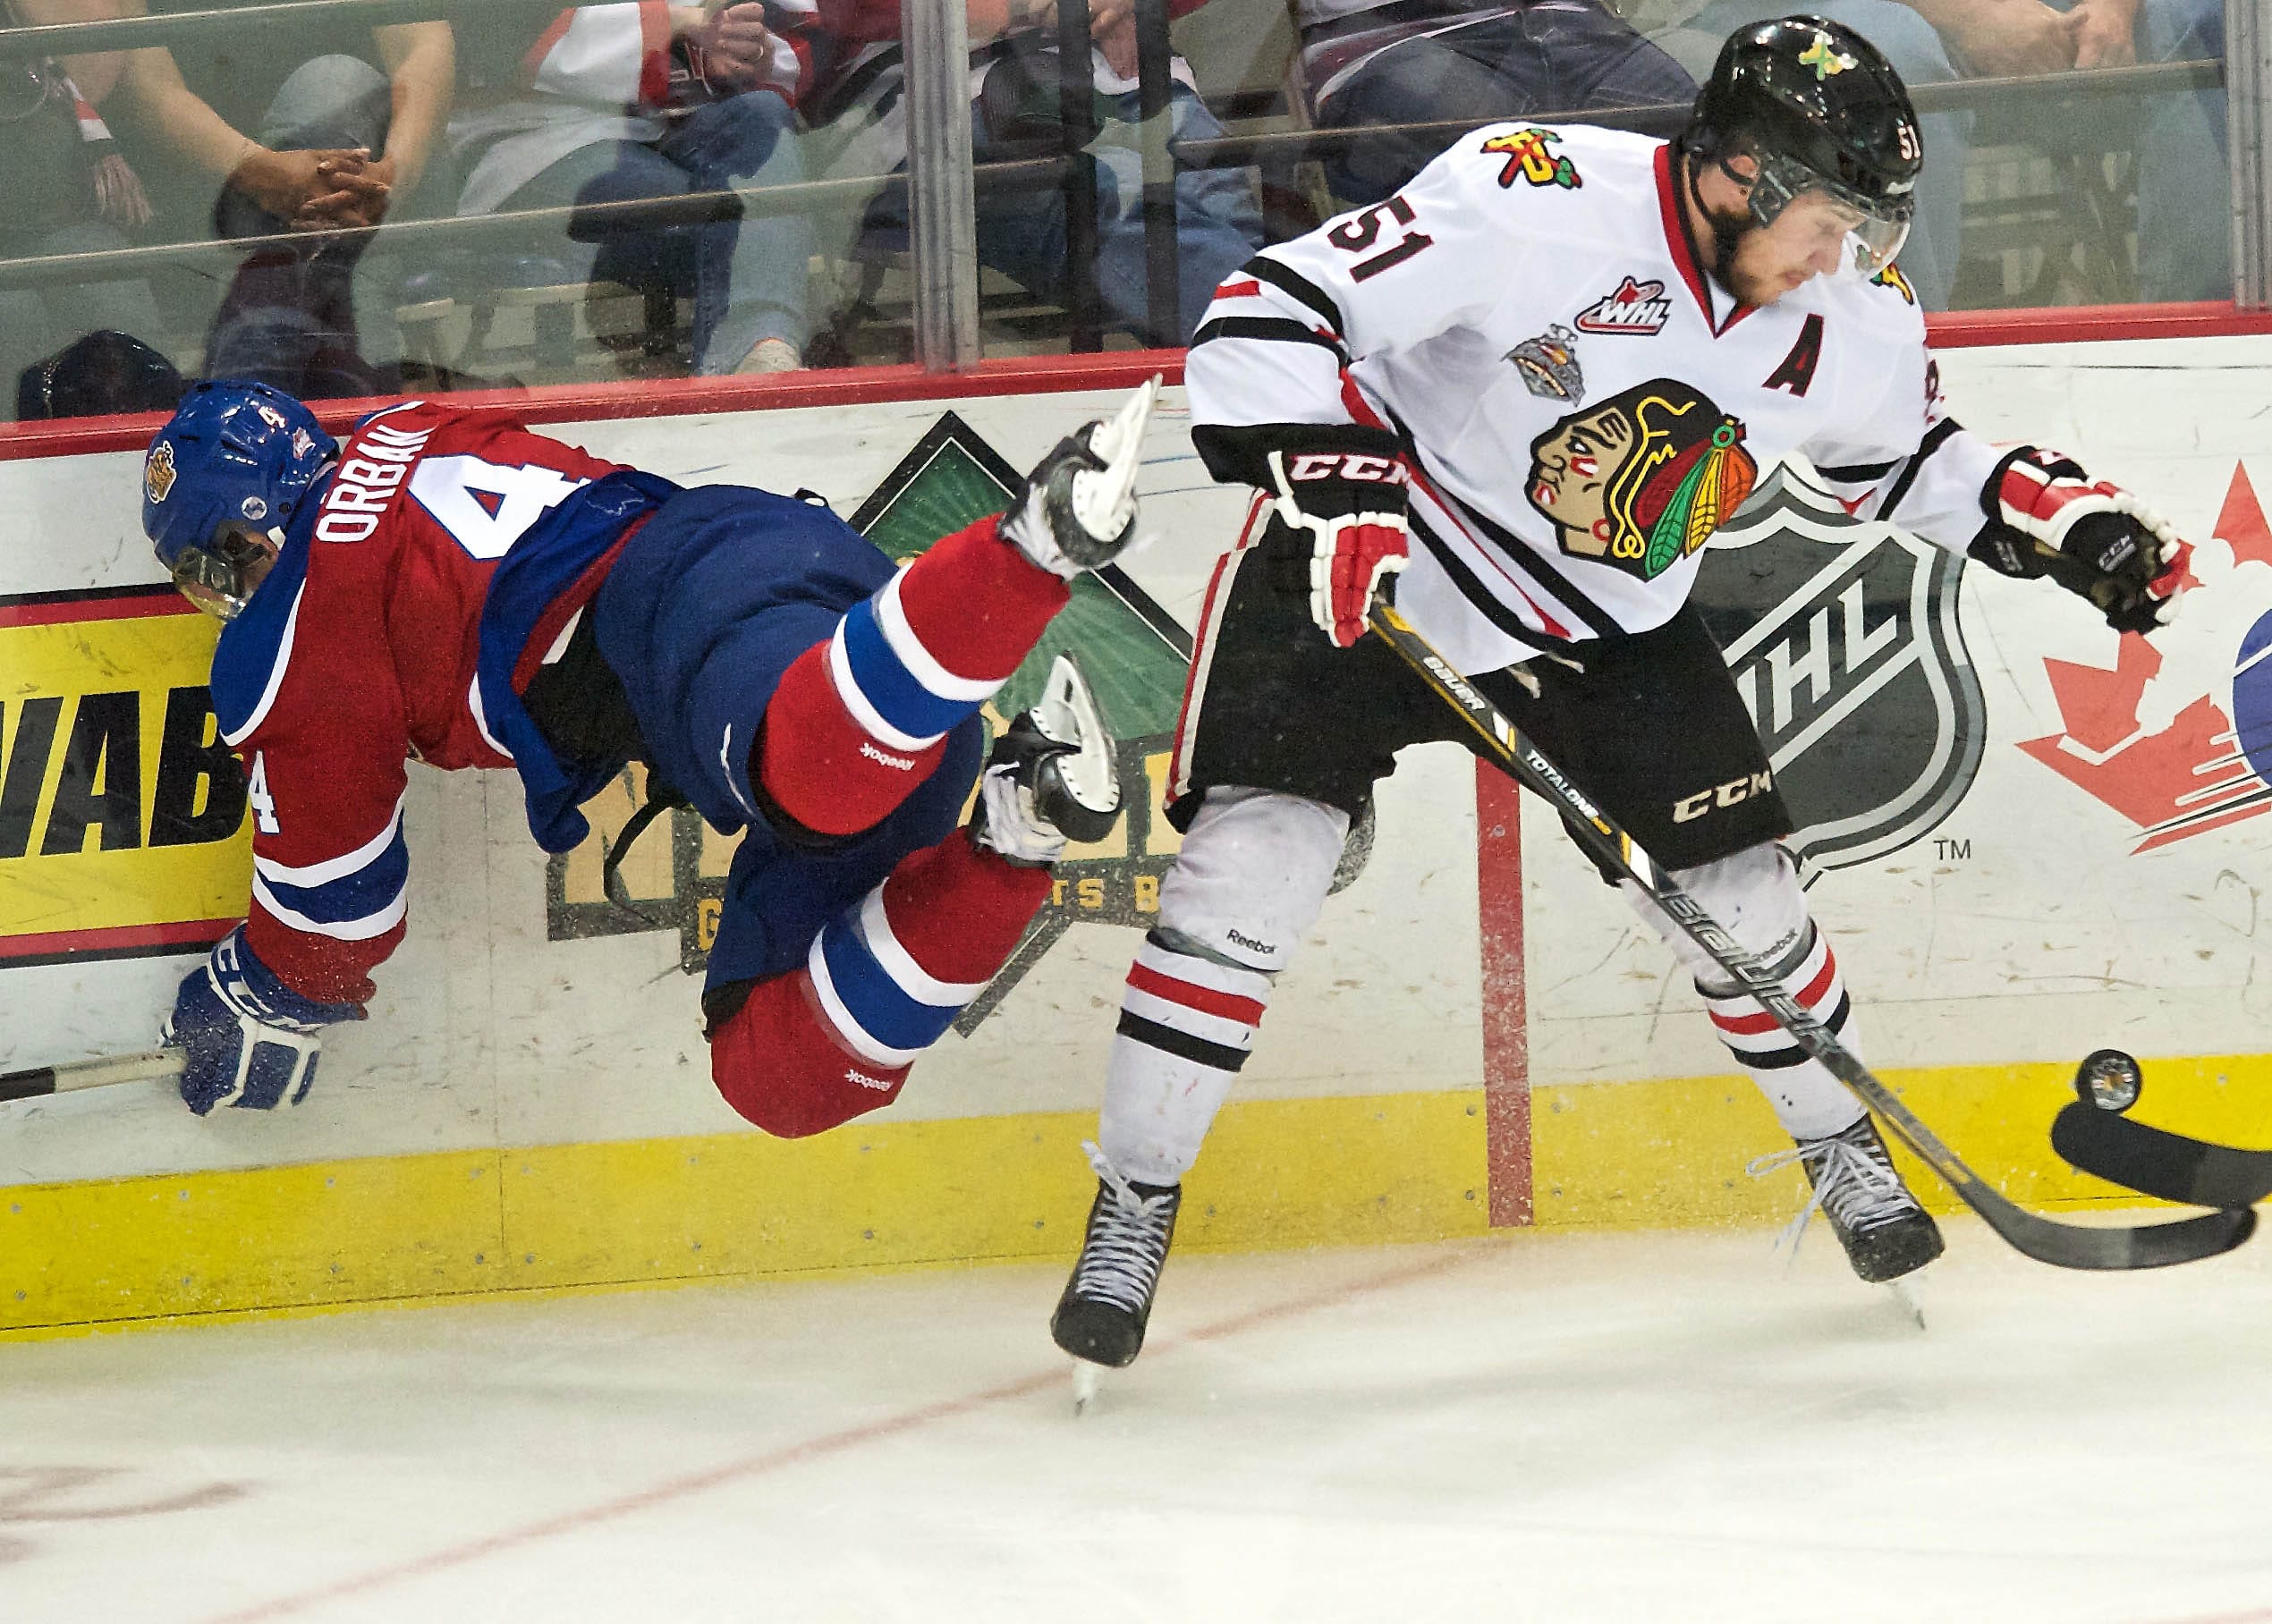 The Winterhawks' Derrick Pouliot checks the Oil Kings' Blake Orban off the puck in the second period of game 7 of the WHL finals at the Veterans Memorial Coliseum on Monday May 12, 2014.